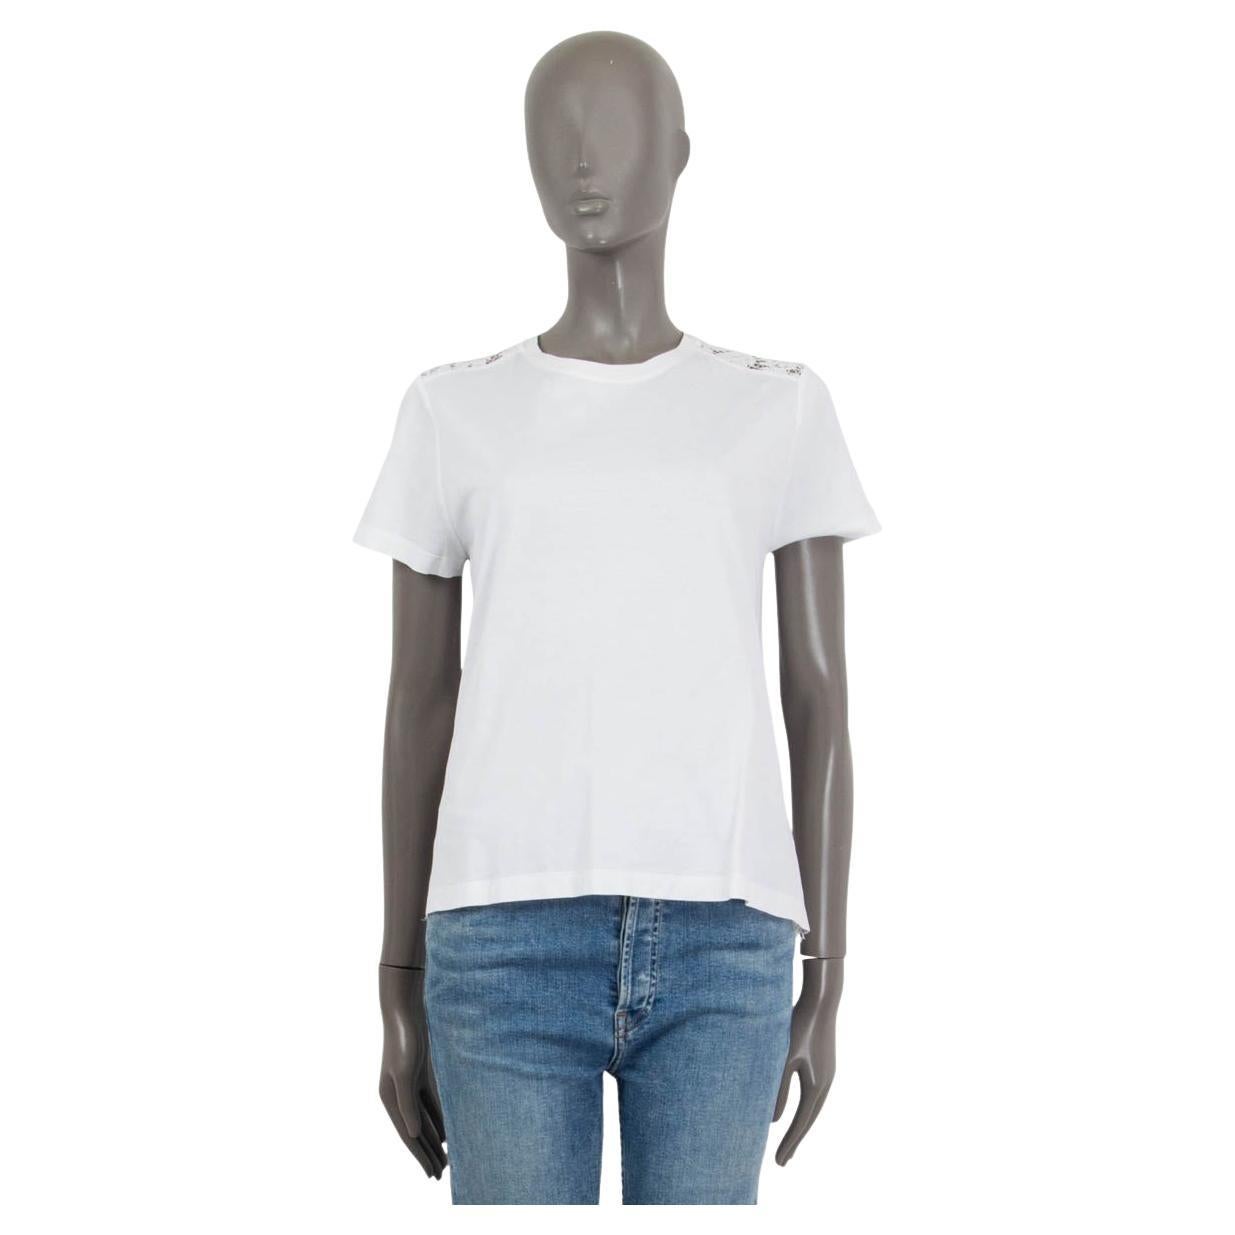 VALENTINO white cotton LACE BACK T-SHIRT Shirt M For Sale